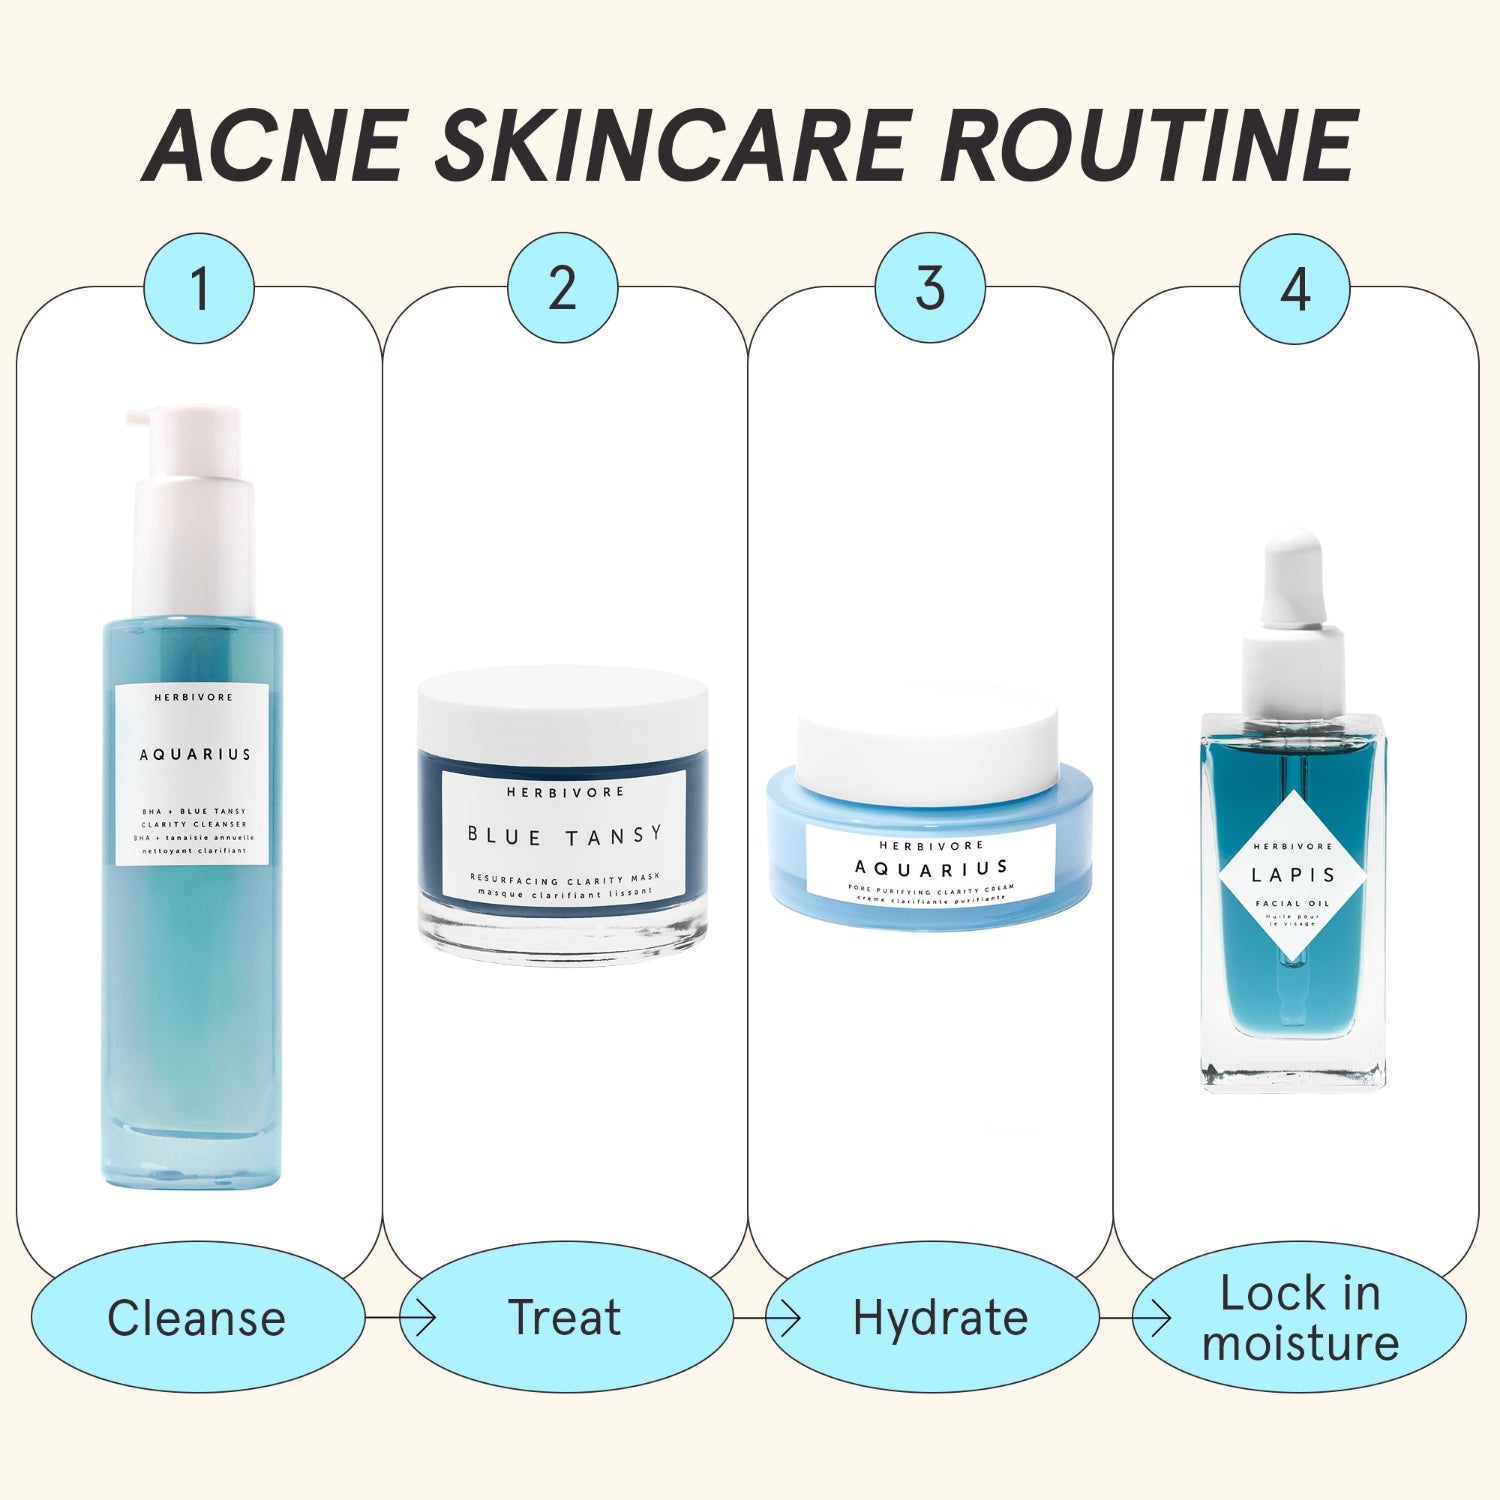 Diagram of how-to-use the four step acne skincare routine featuring Aquarius, Blue Tansy and Lapis products